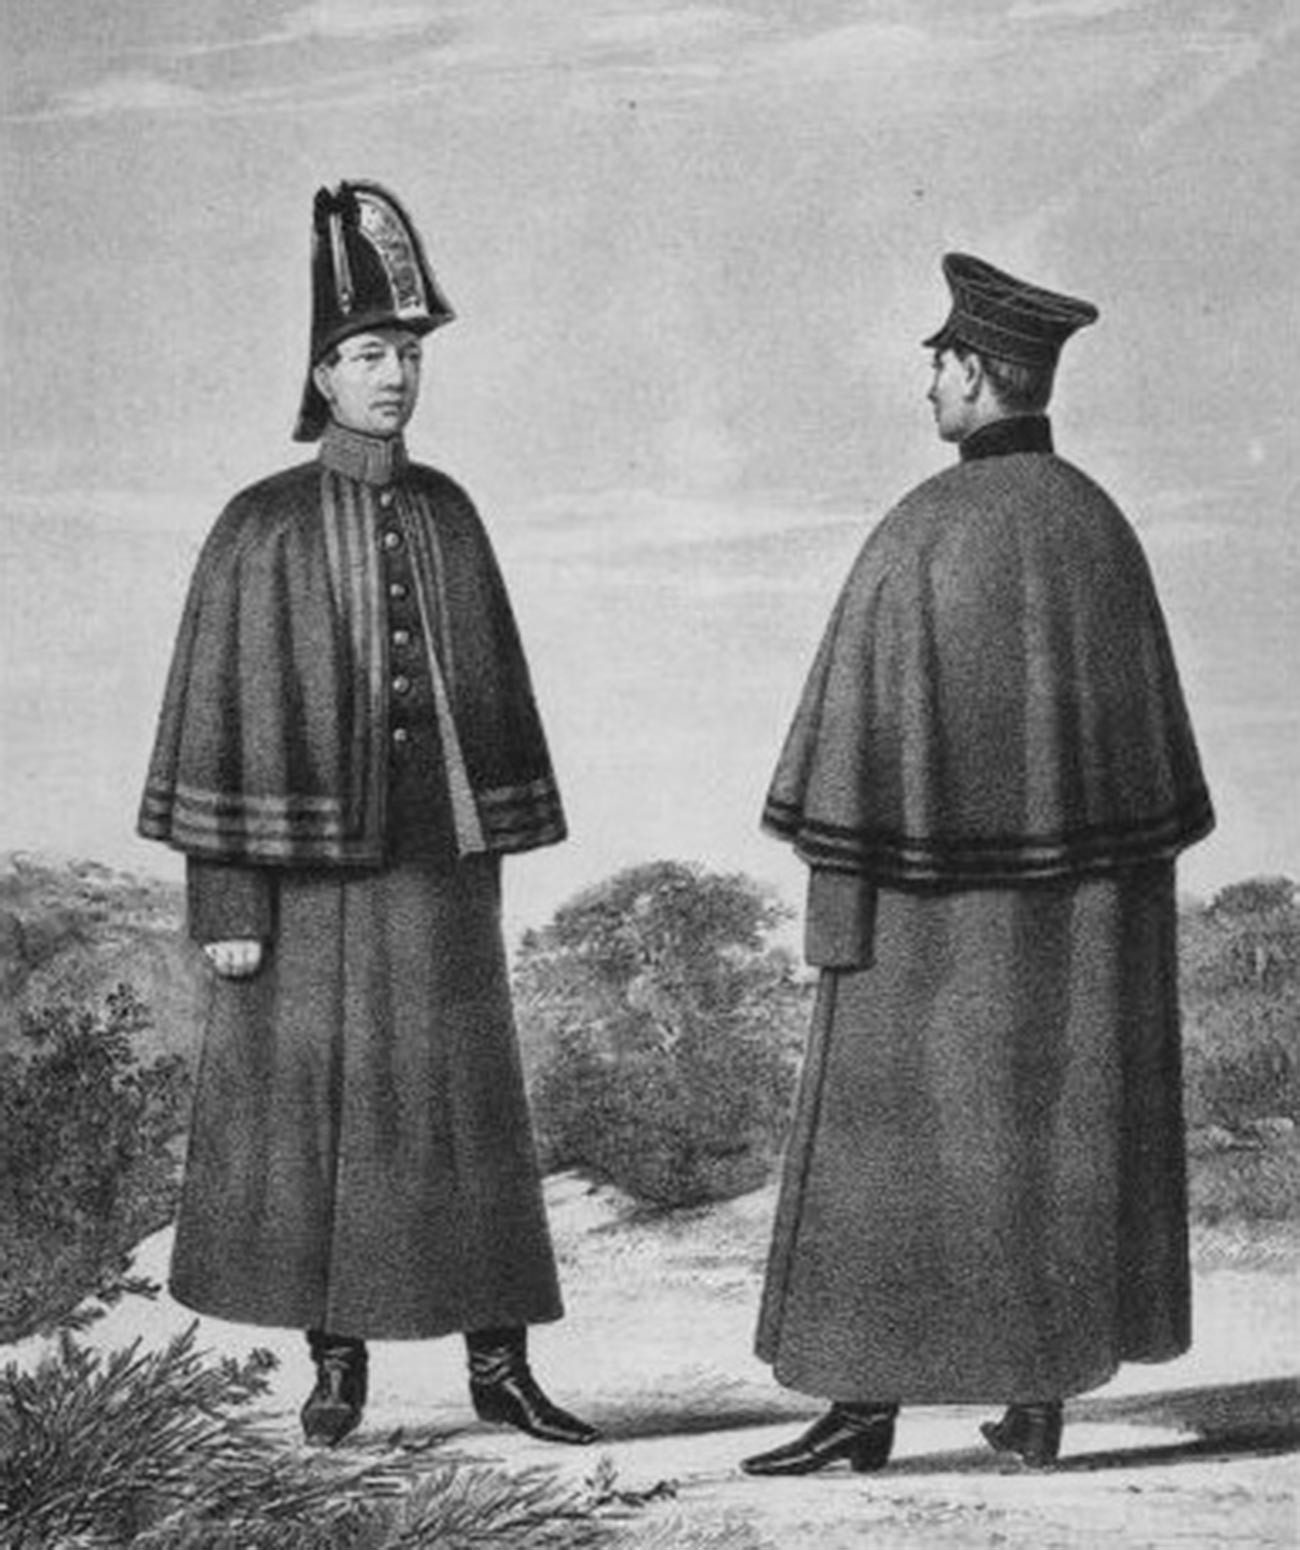 Batmen of the Imperial Guard (L) and of the Imperial Army (R) in their uniform, 1825-1855